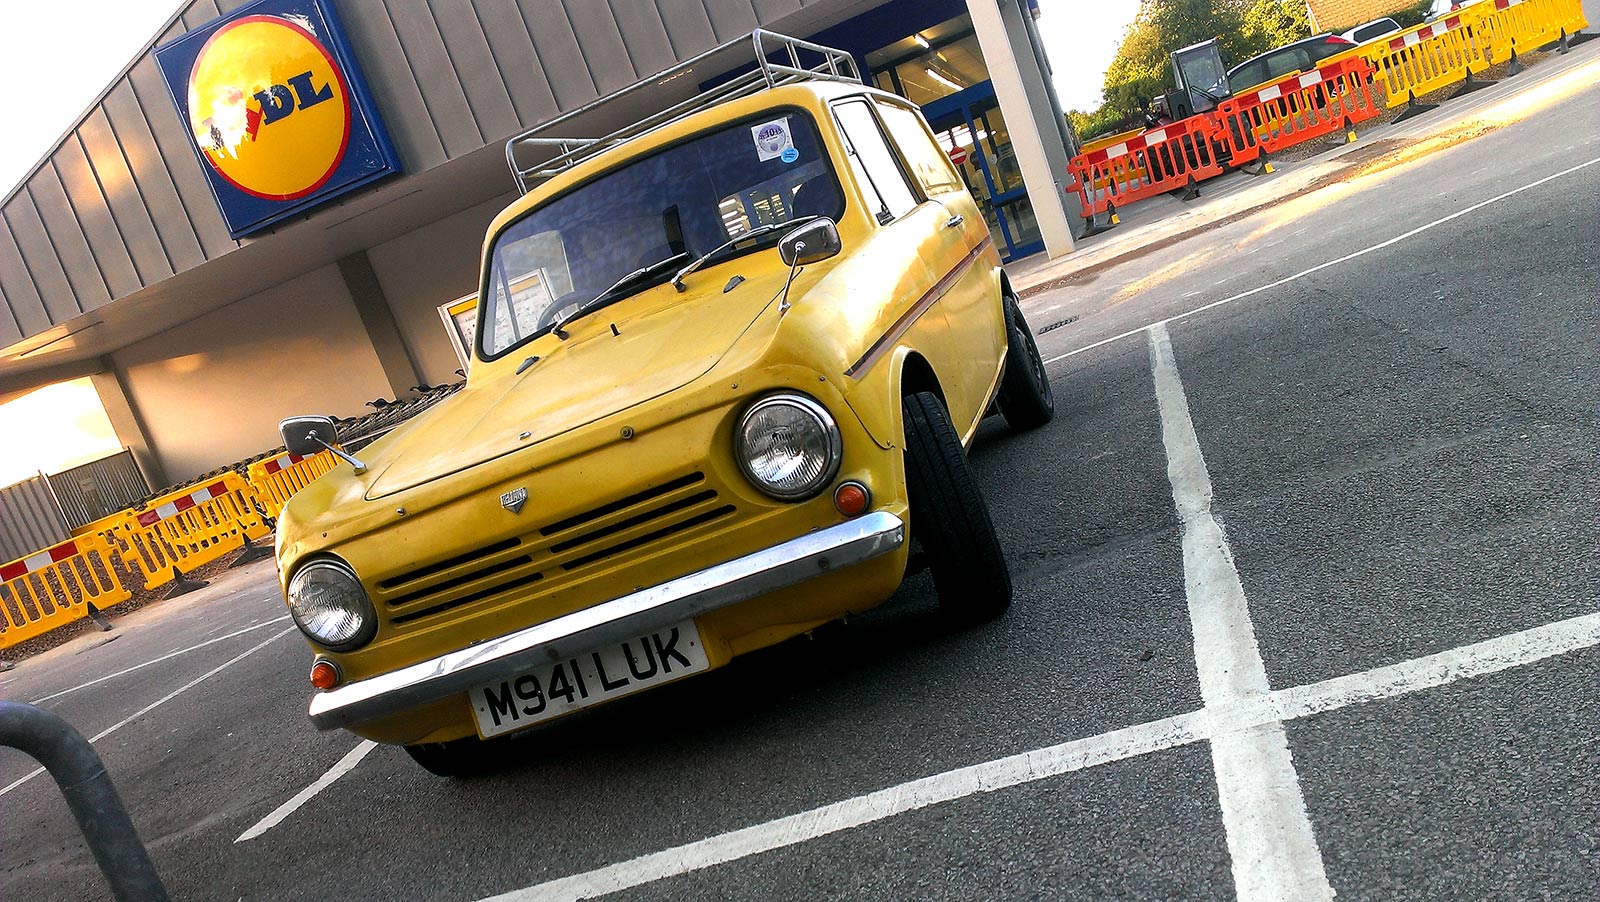 ICMSTUDIOS - A great Funky car I saw in the Lidl carpark Crowborough 